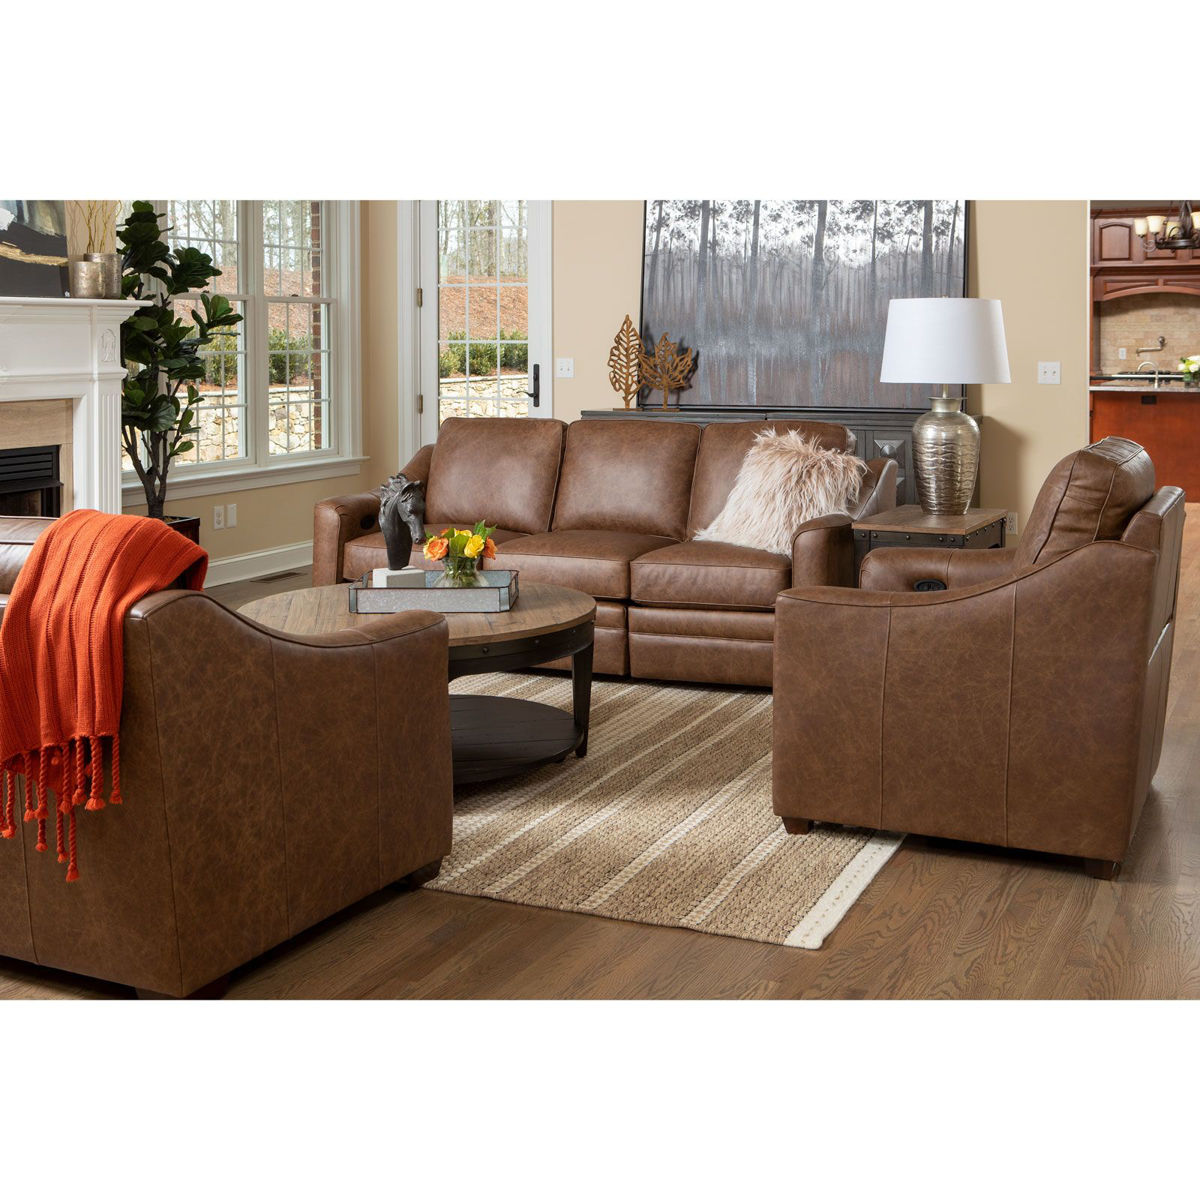 Picture of Winslow Leather Power Recliner Sofa